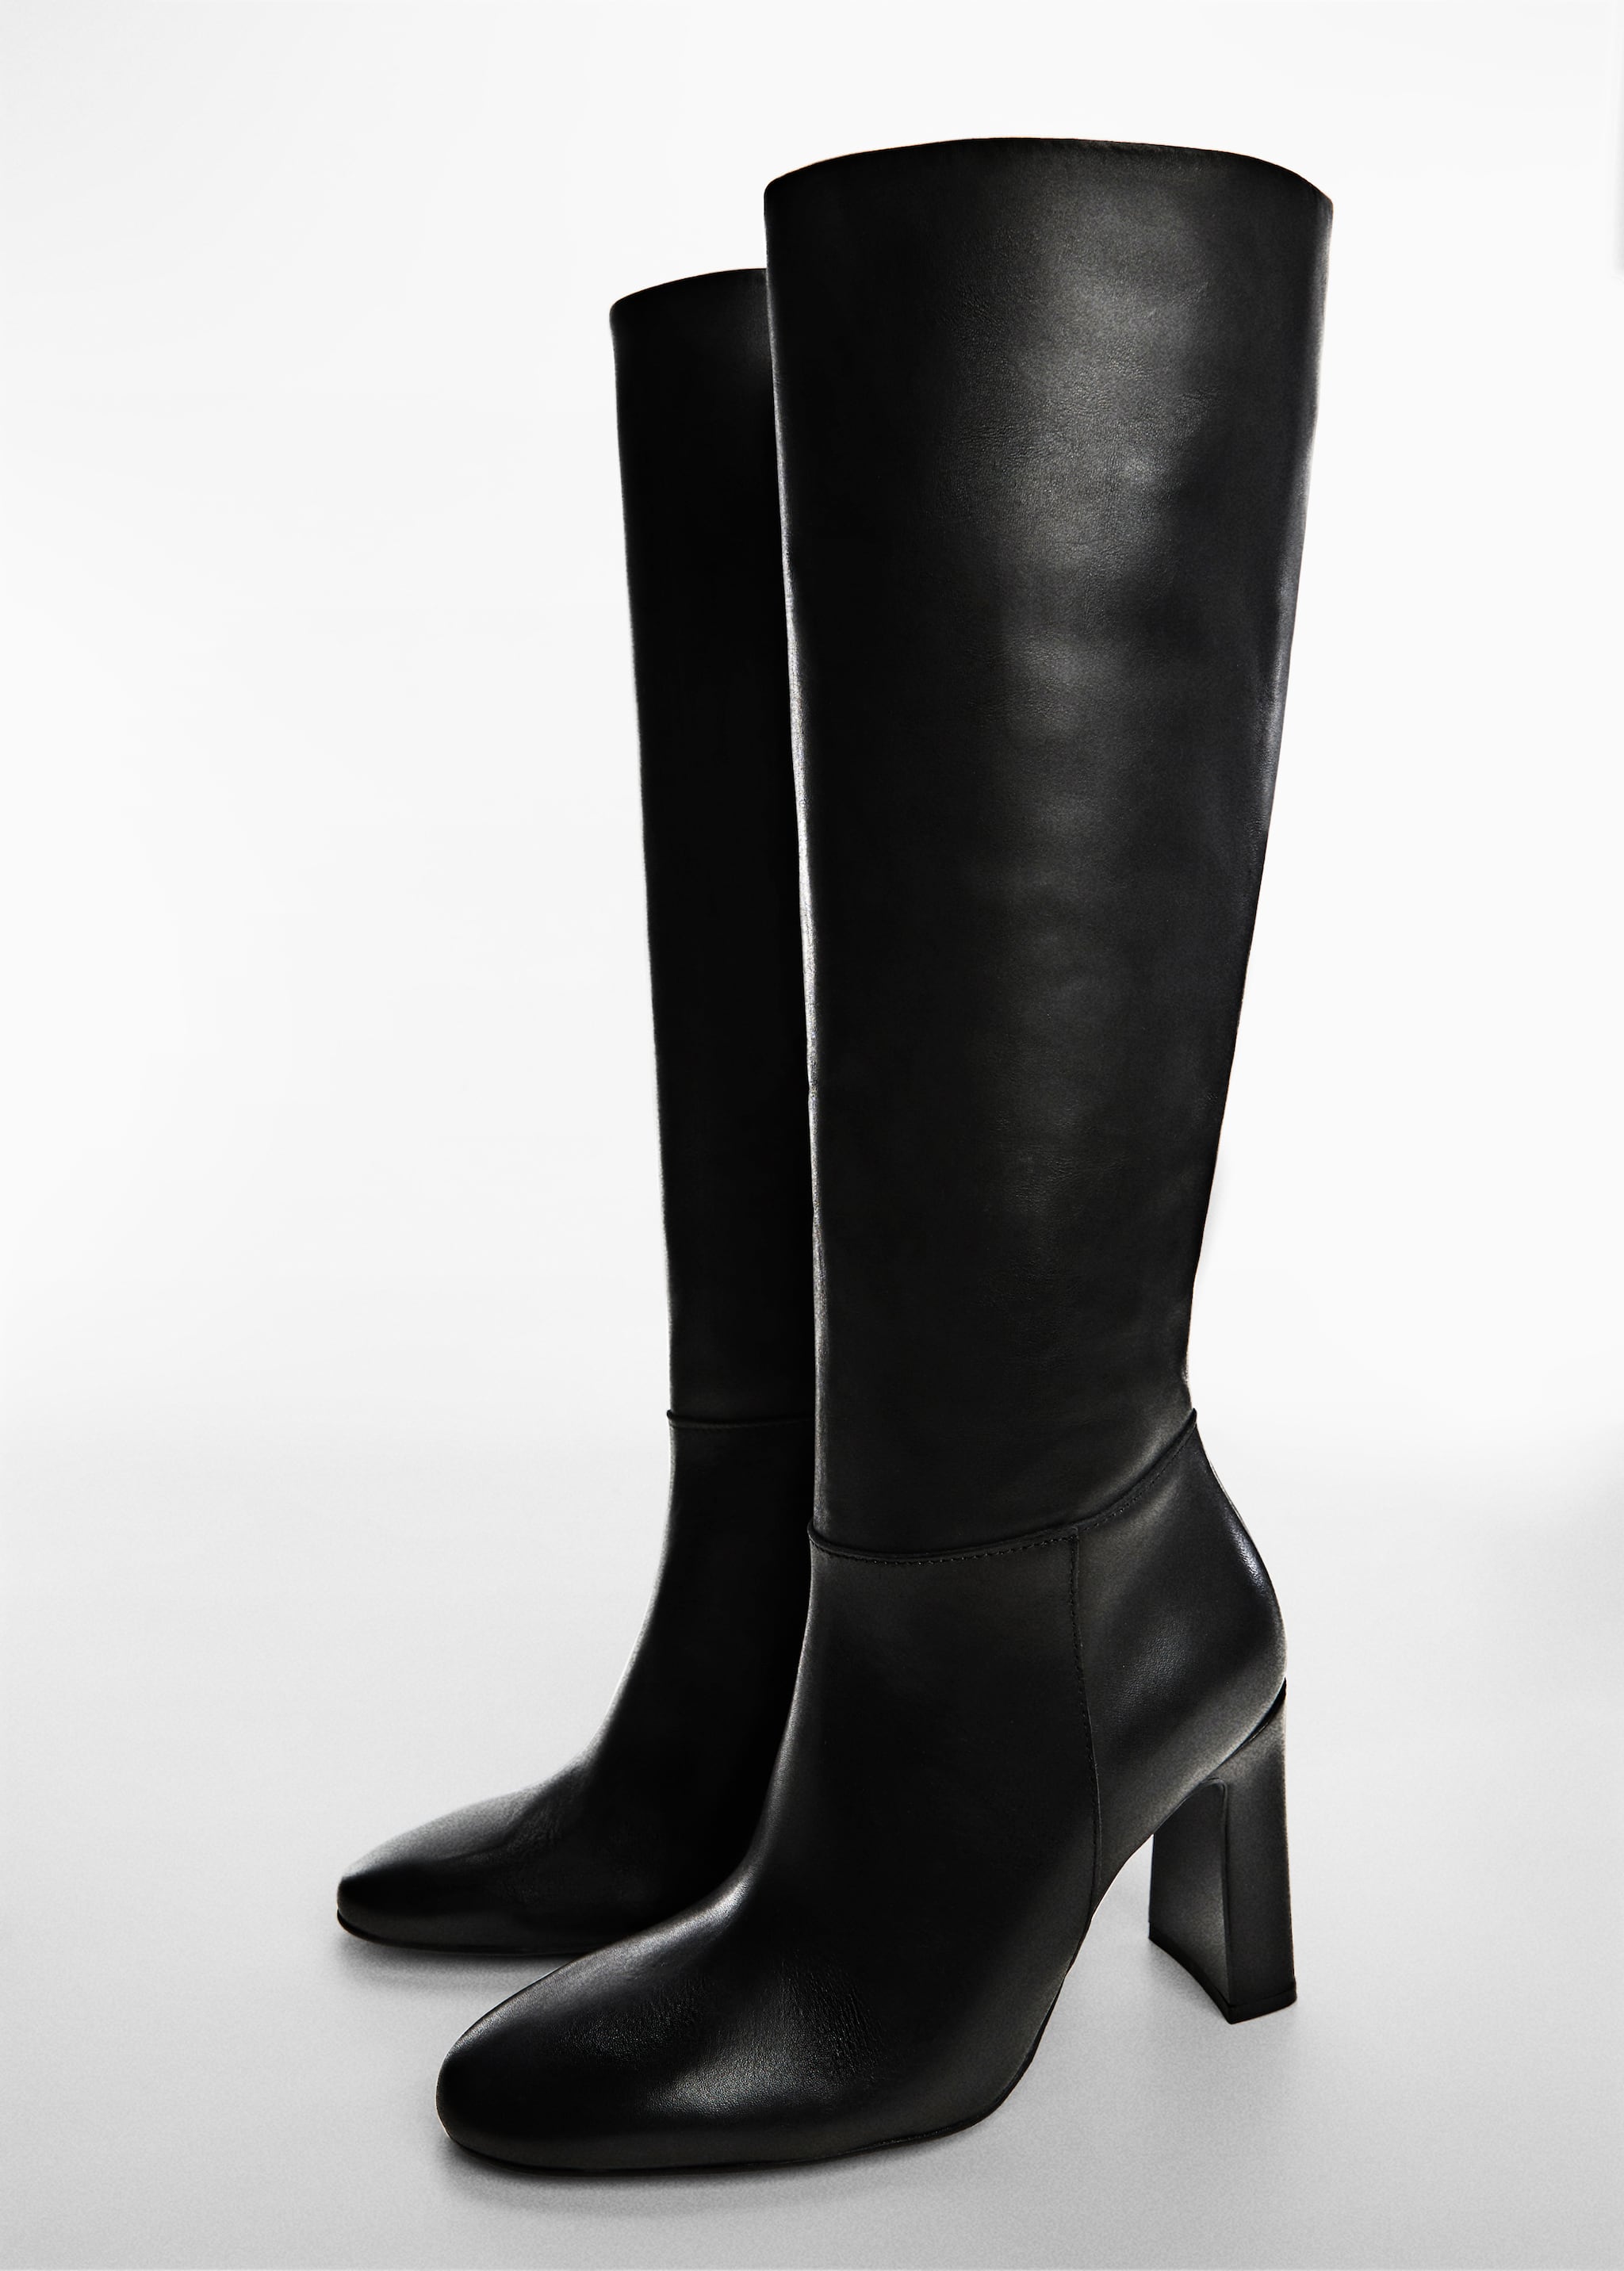 Leather boots with tall leg - Medium plane